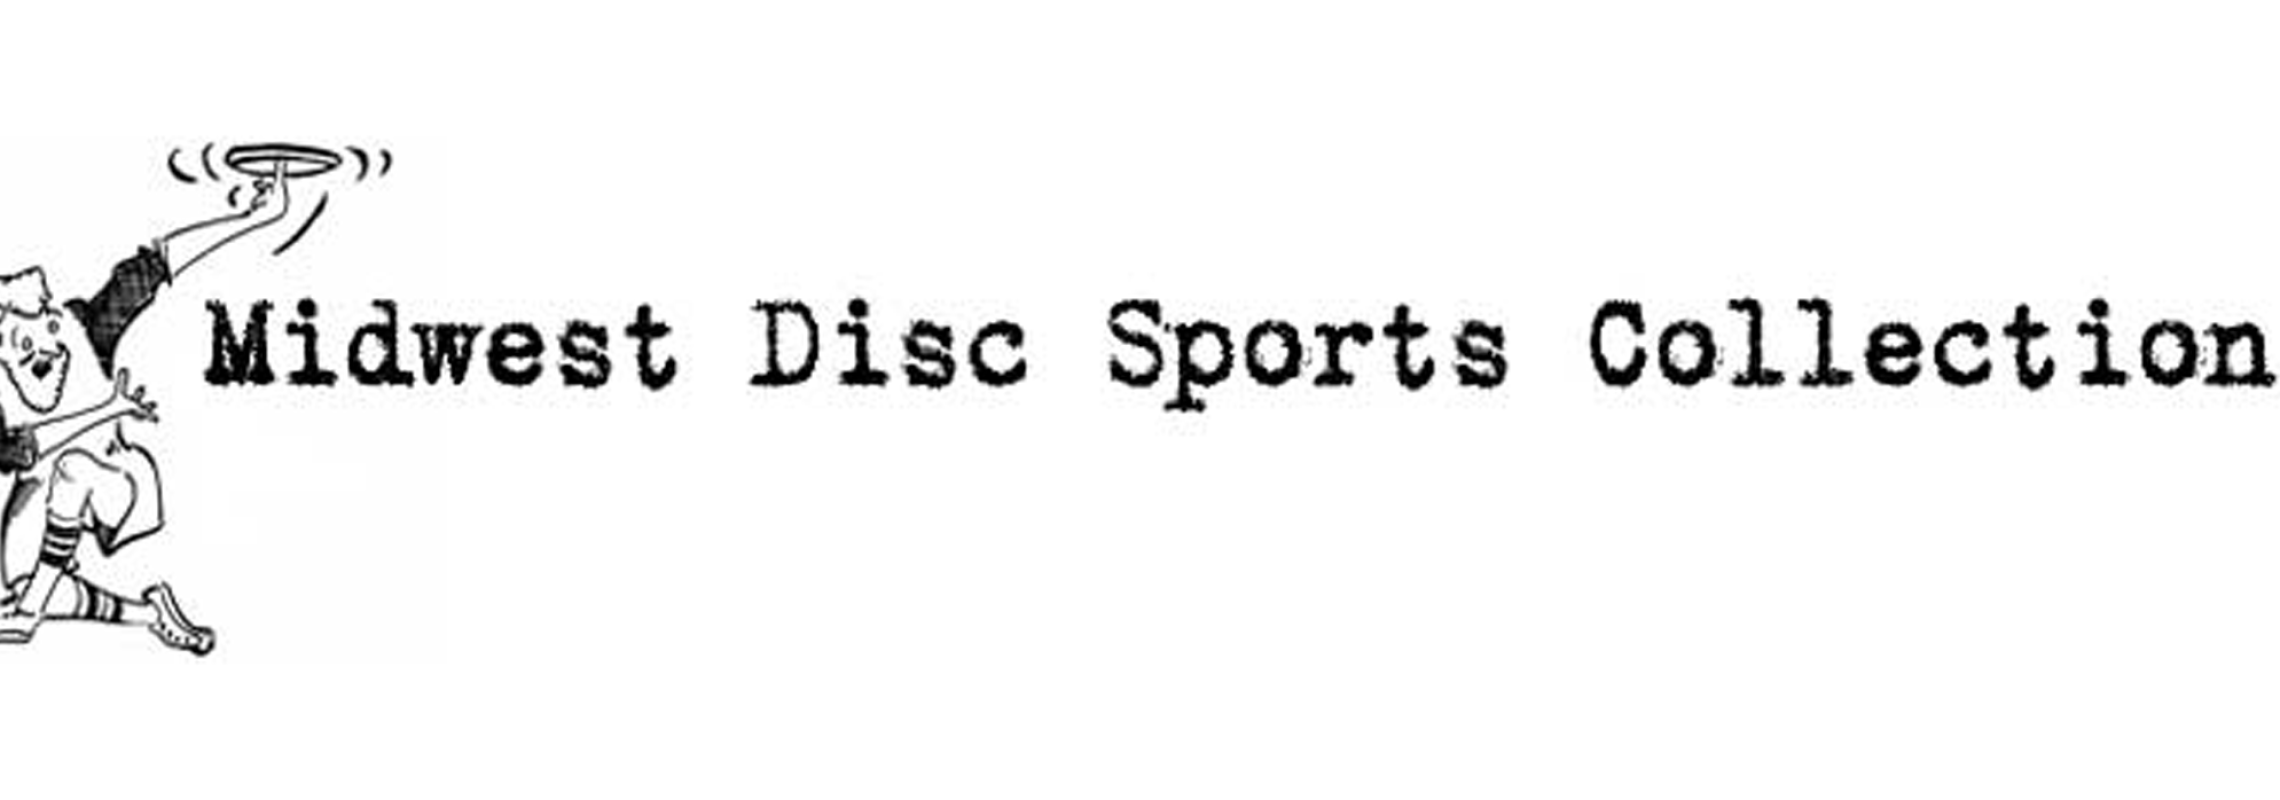 Midwest Disc Sports Collection